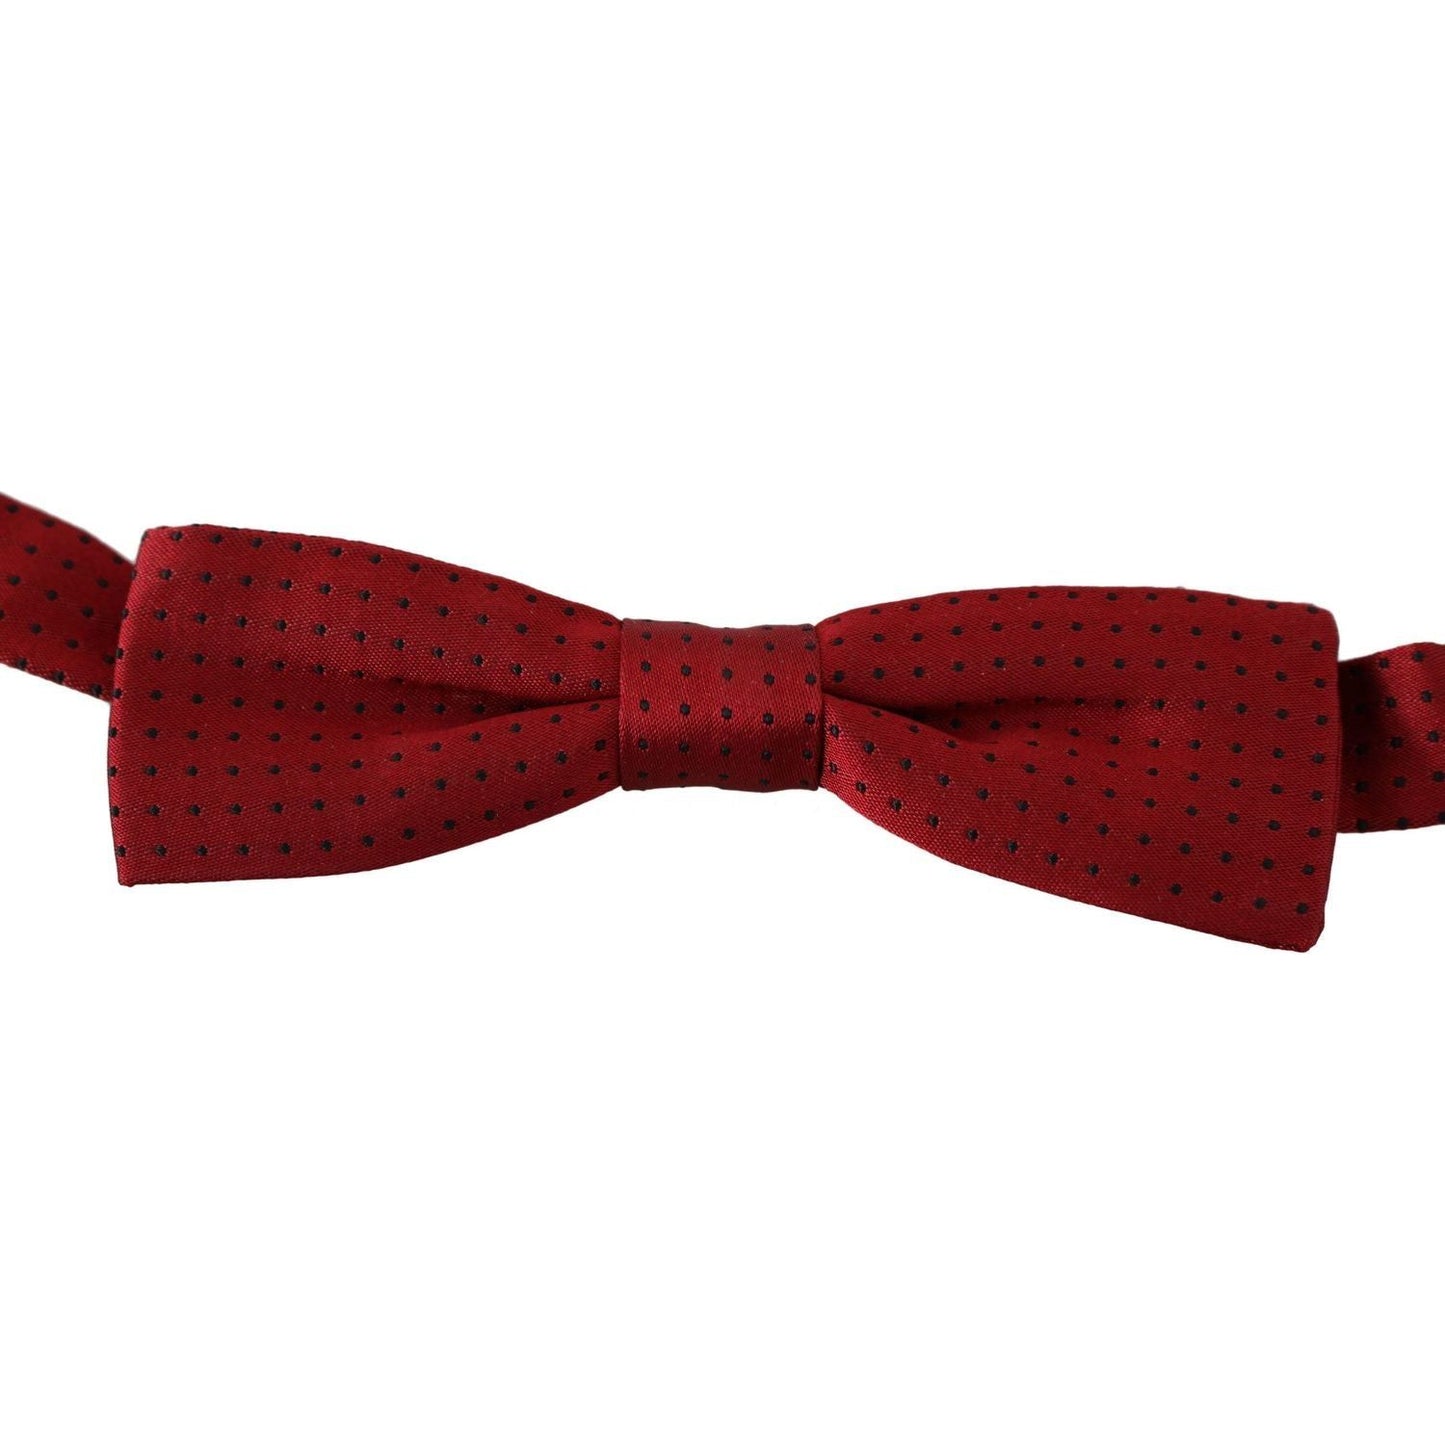 Dolce & Gabbana Elegant Red Dotted Silk Bow Tie red-dotted-silk-adjustable-neck-papillon-bow-tie Bow Tie IMG_3783-scaled-52bf32b5-474.jpg